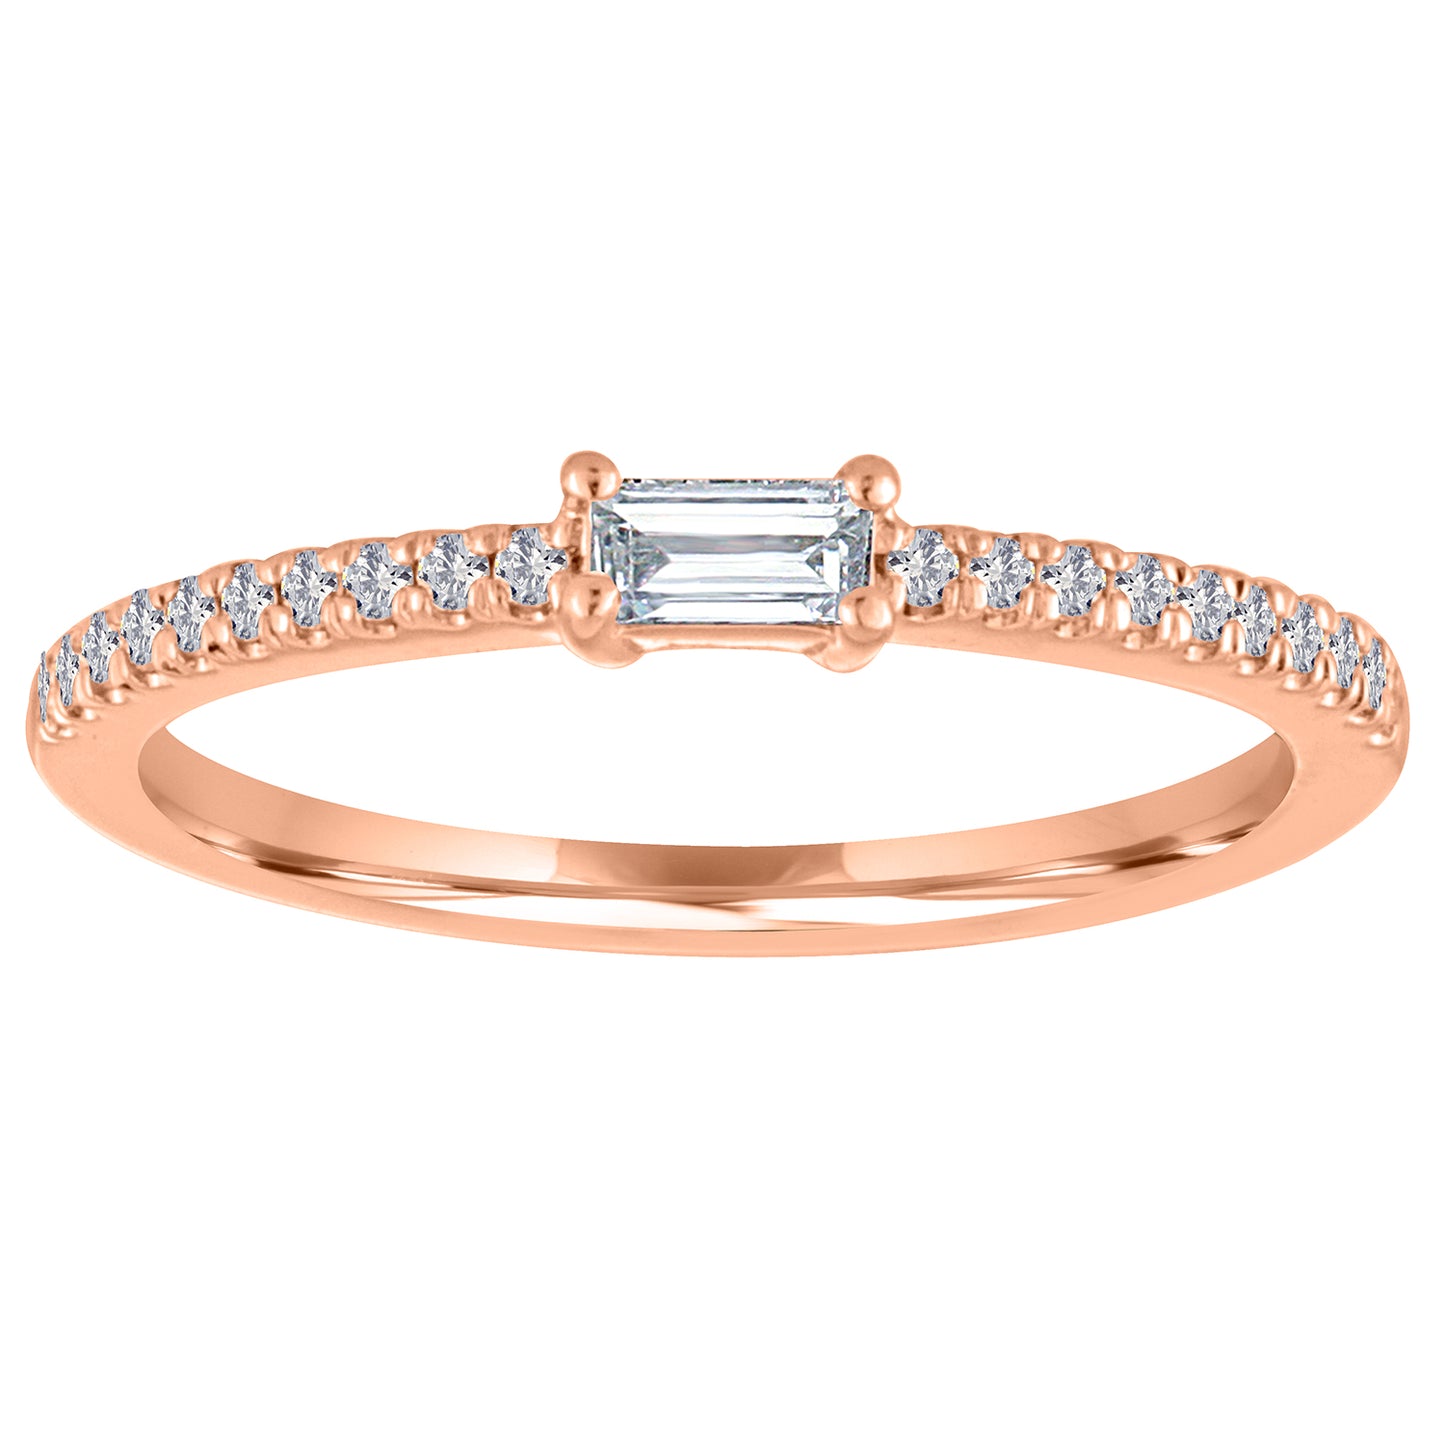 Rose gold skinny band with a diamond baguette in the center and round diamonds on the shank.